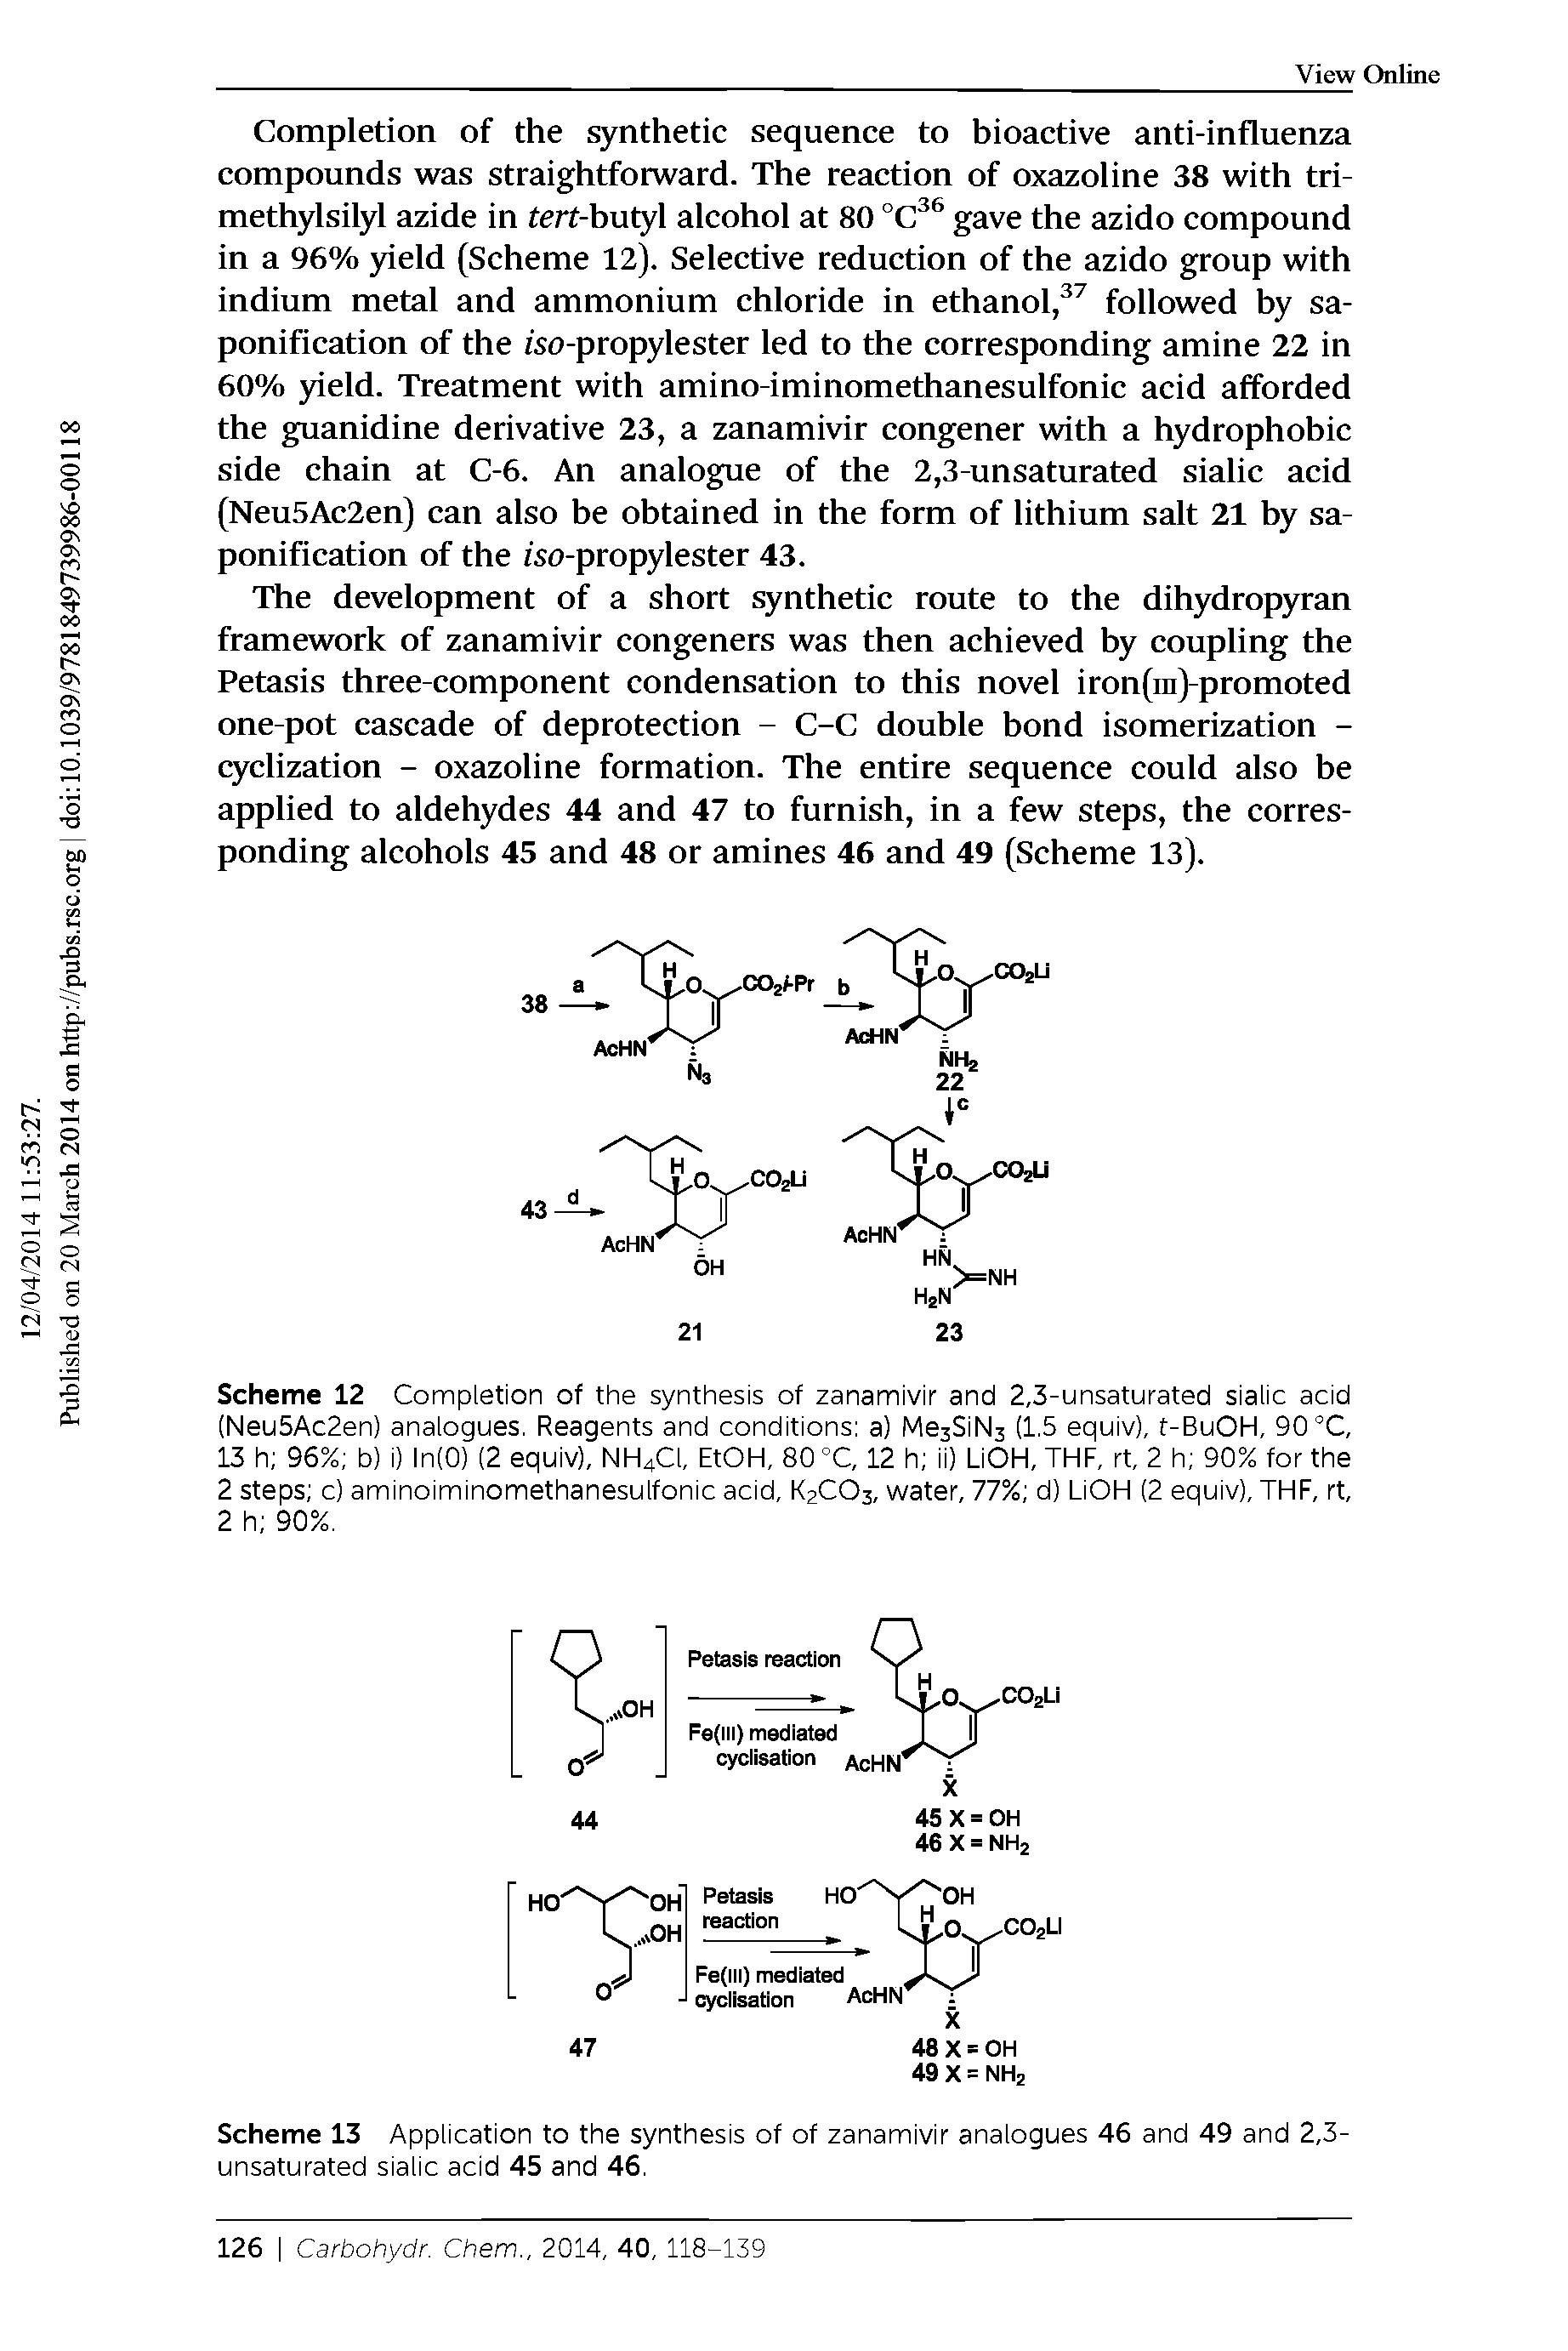 Scheme 12 Completion of the synthesis of zanamivir and 2,3-unsaturated sialic acid (Neu5Ac2en) analogues. Reagents and conditions a) Me3SiN3 (1.5 equiv), t-BuOH, 90 °C, 13 h 96% b) i) ln(0) (2 equiv), NH4CI, EtOH, 80 °C, 12 h ii) LiOH, THE, rt, 2 h 90% for the 2 steps c) aminoiminomethanesulfonic acid, K2CO3, water, 77% d) LiOH (2 equiv), THE, rt, 2 h 90%.